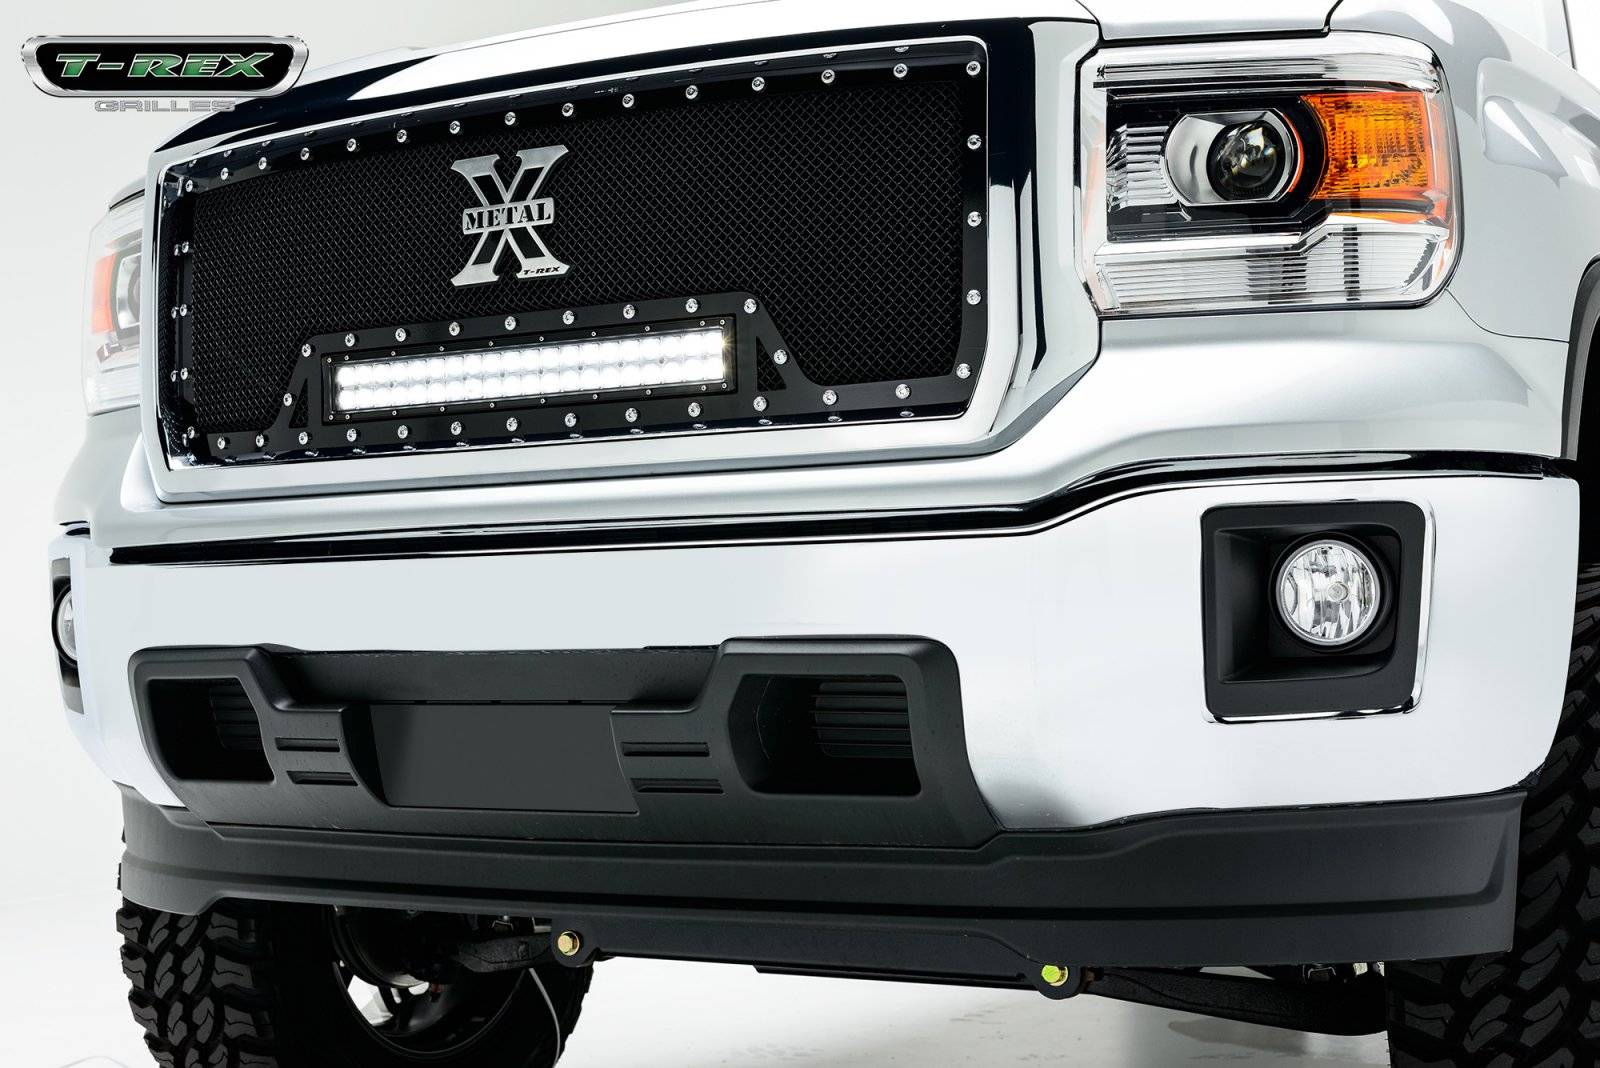 T-REX GRILLES - 2014-2015 GMC Sierra 1500 Torch Grille, Black, 1 Pc, Insert, Chrome Studs with (1) 20 LED - Part # 6312081